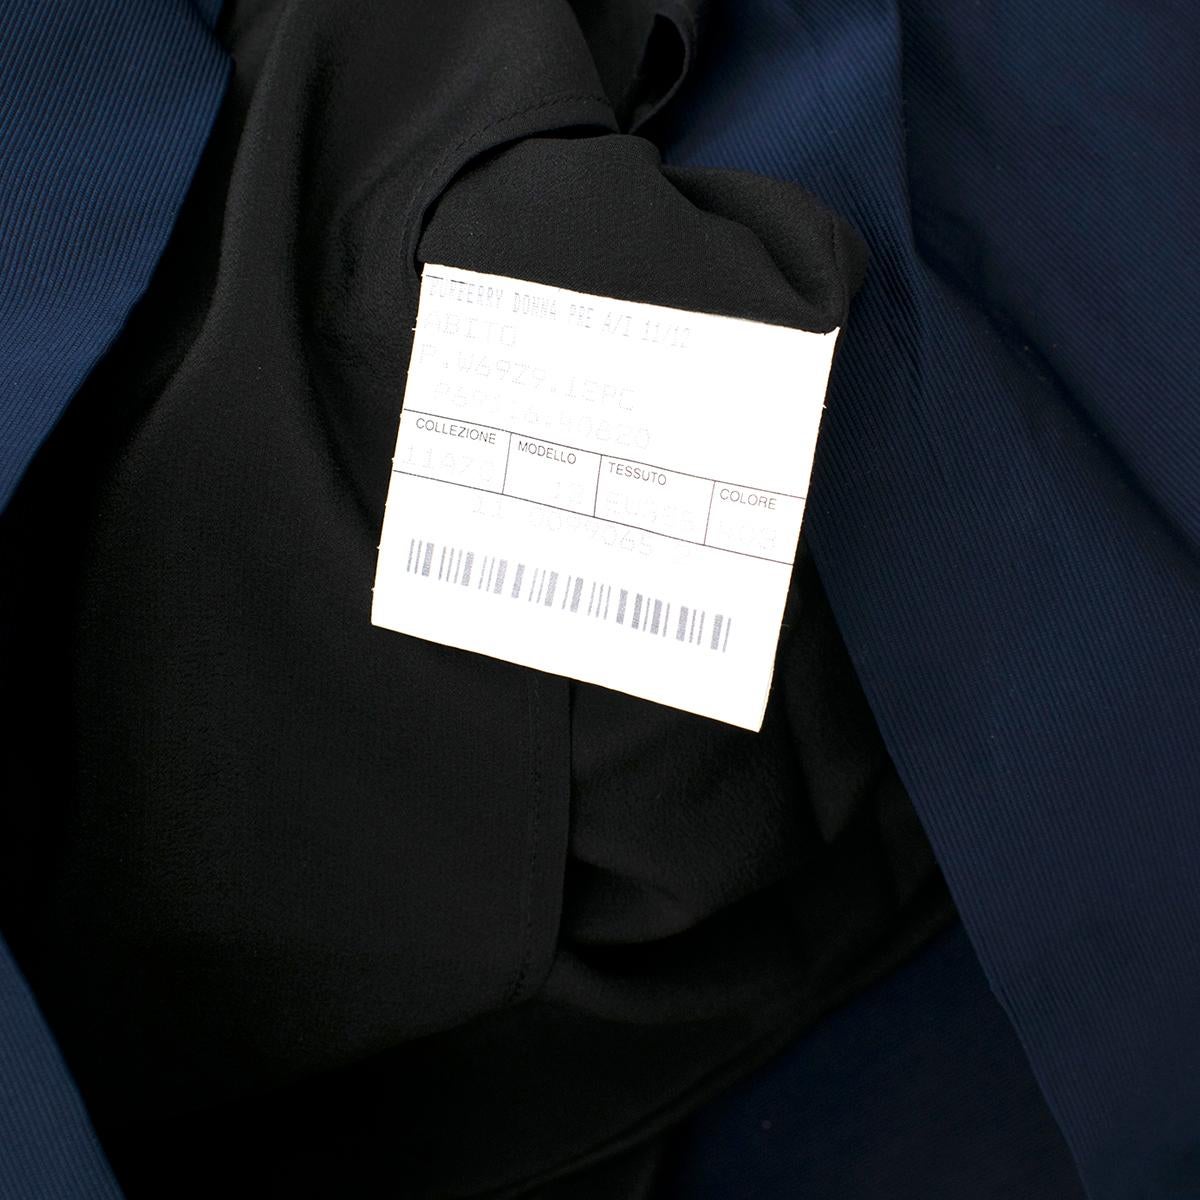 Burberry Prorsum Dark Blue Puff Sleeve Dress - Size Medium In Excellent Condition For Sale In London, GB